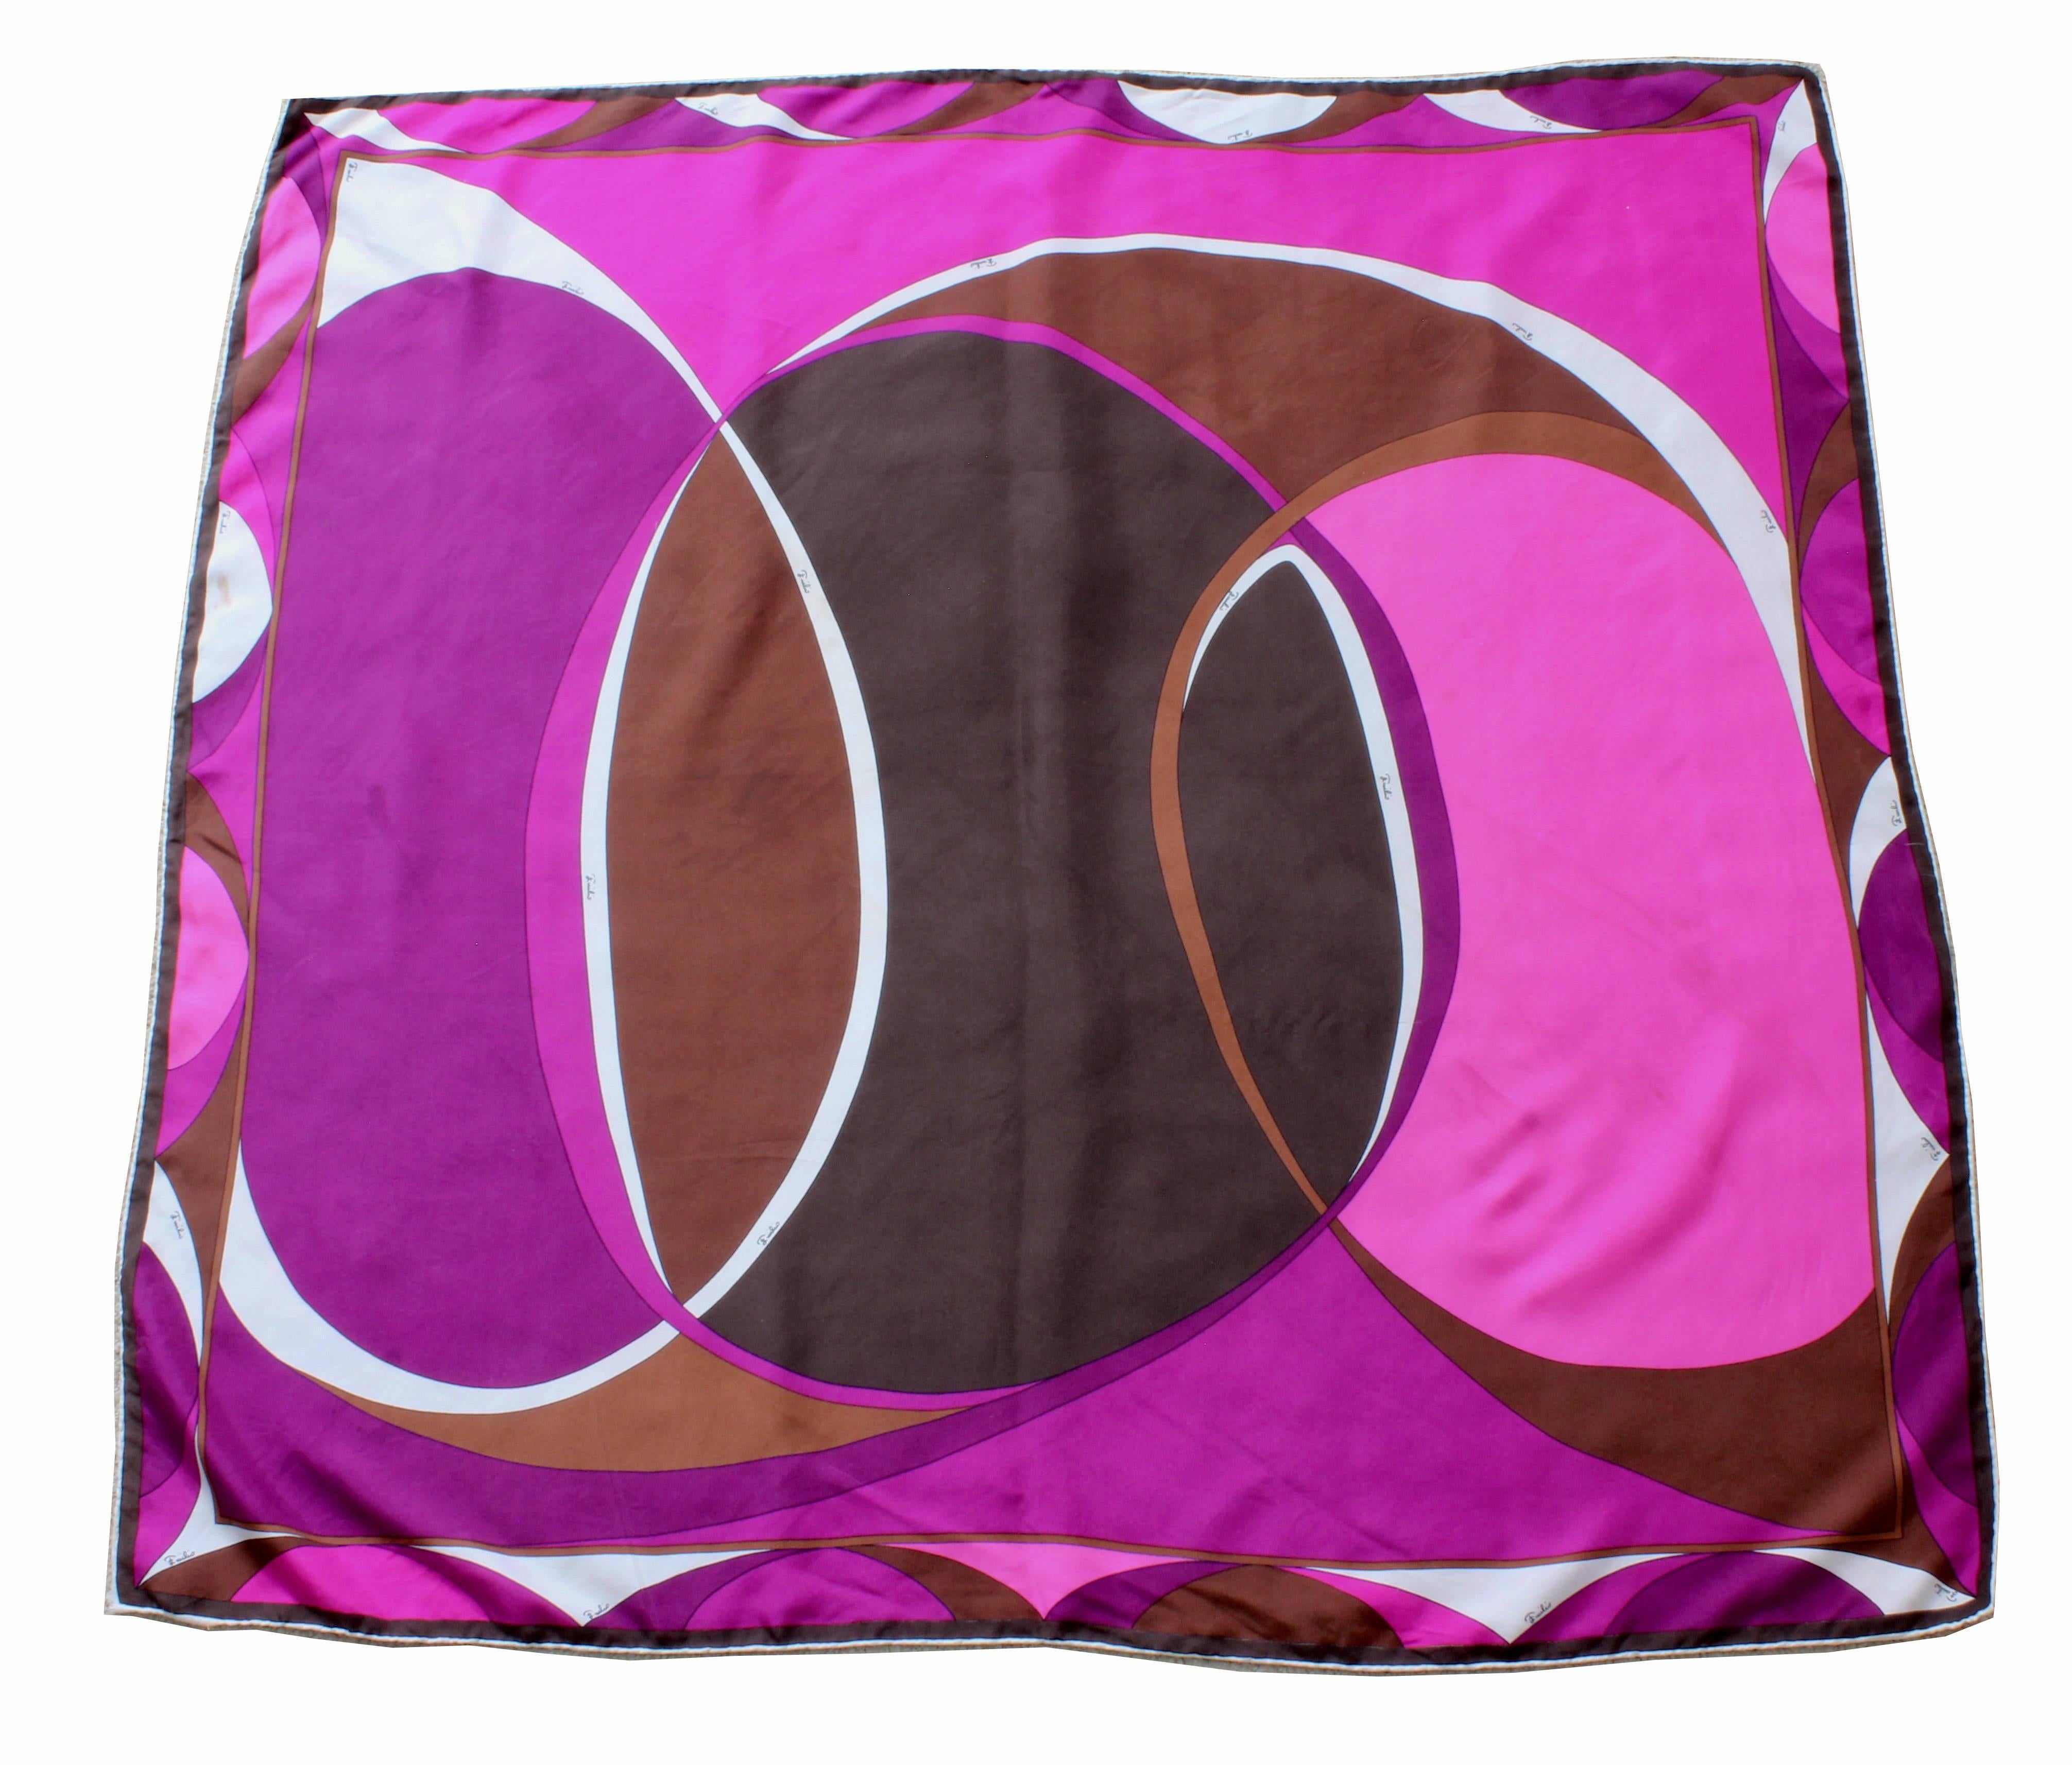 Emilio Pucci Abstract Print Scarf Shawl Silk Twill 35in Purple Brown Pink White For Sale 3